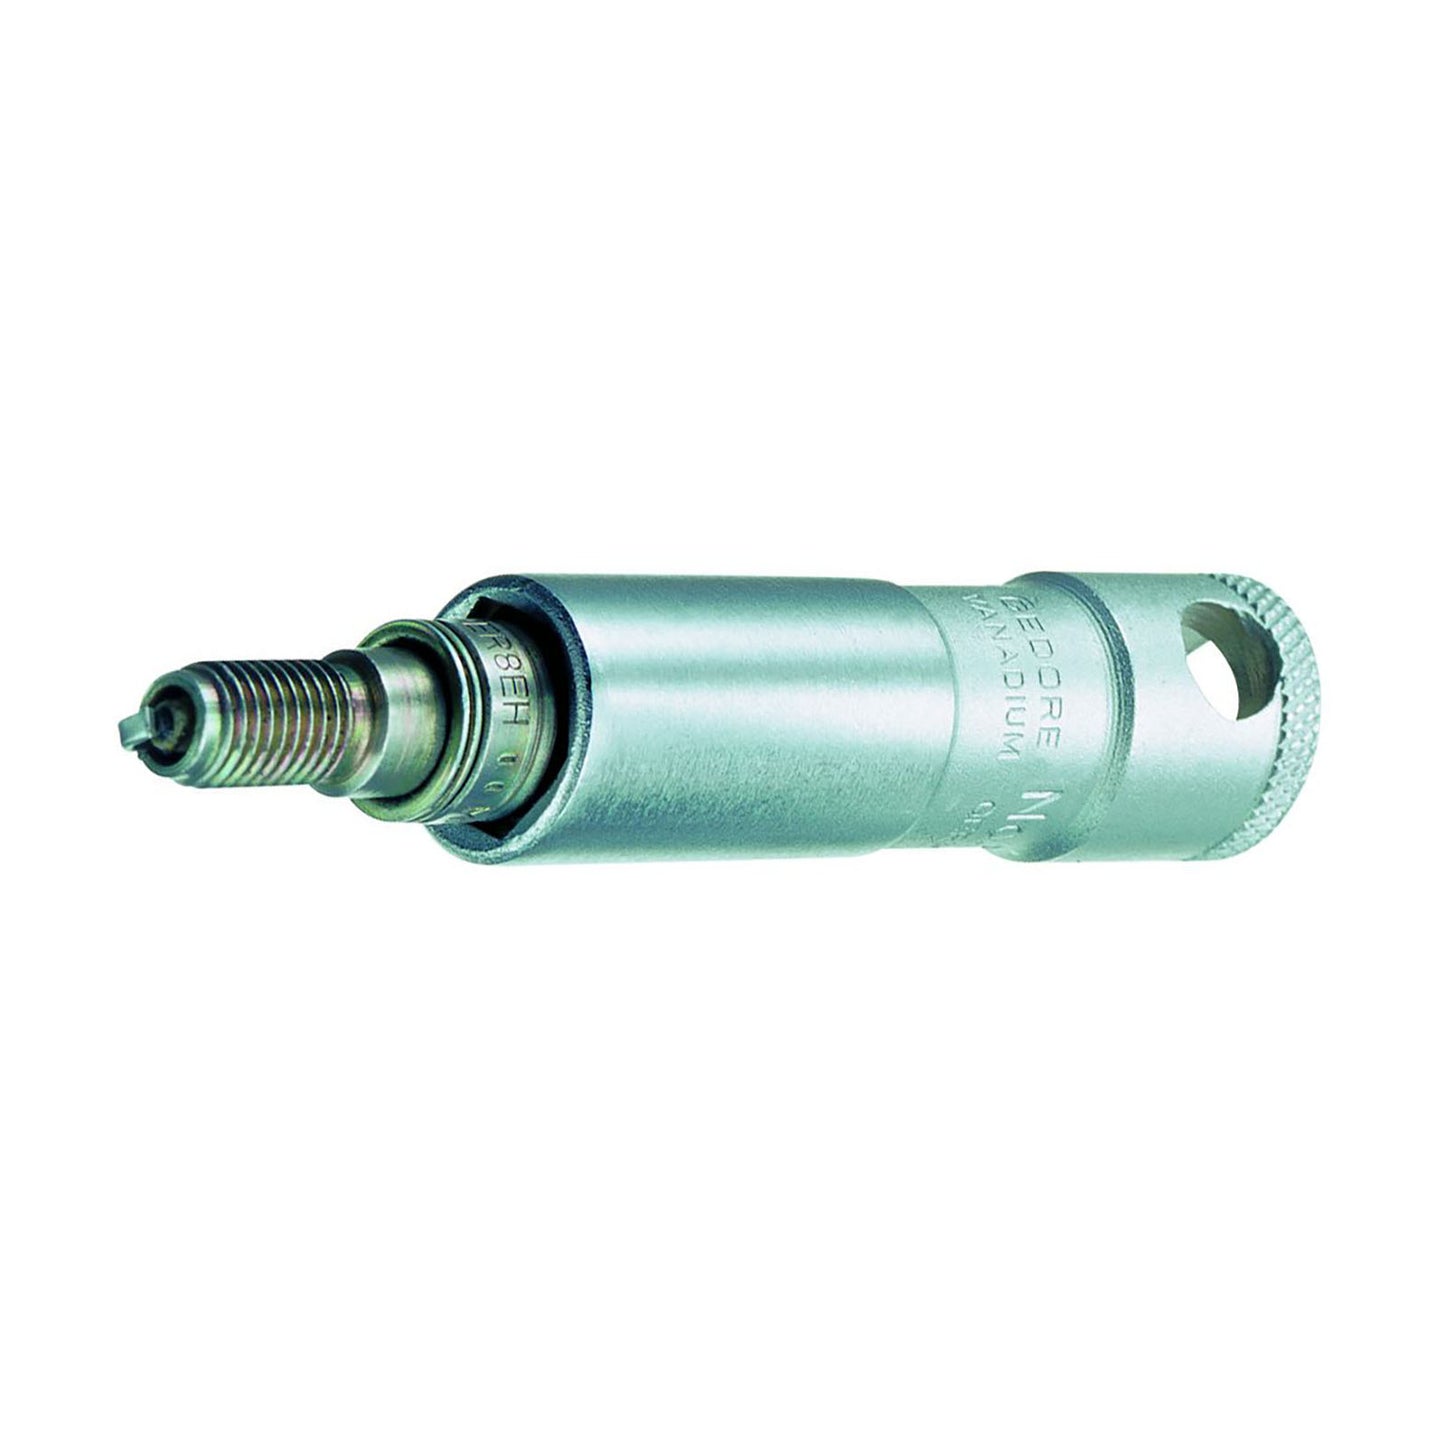 GEDORE 57 MH - Spark Plug Socket with Magnet (6362150)